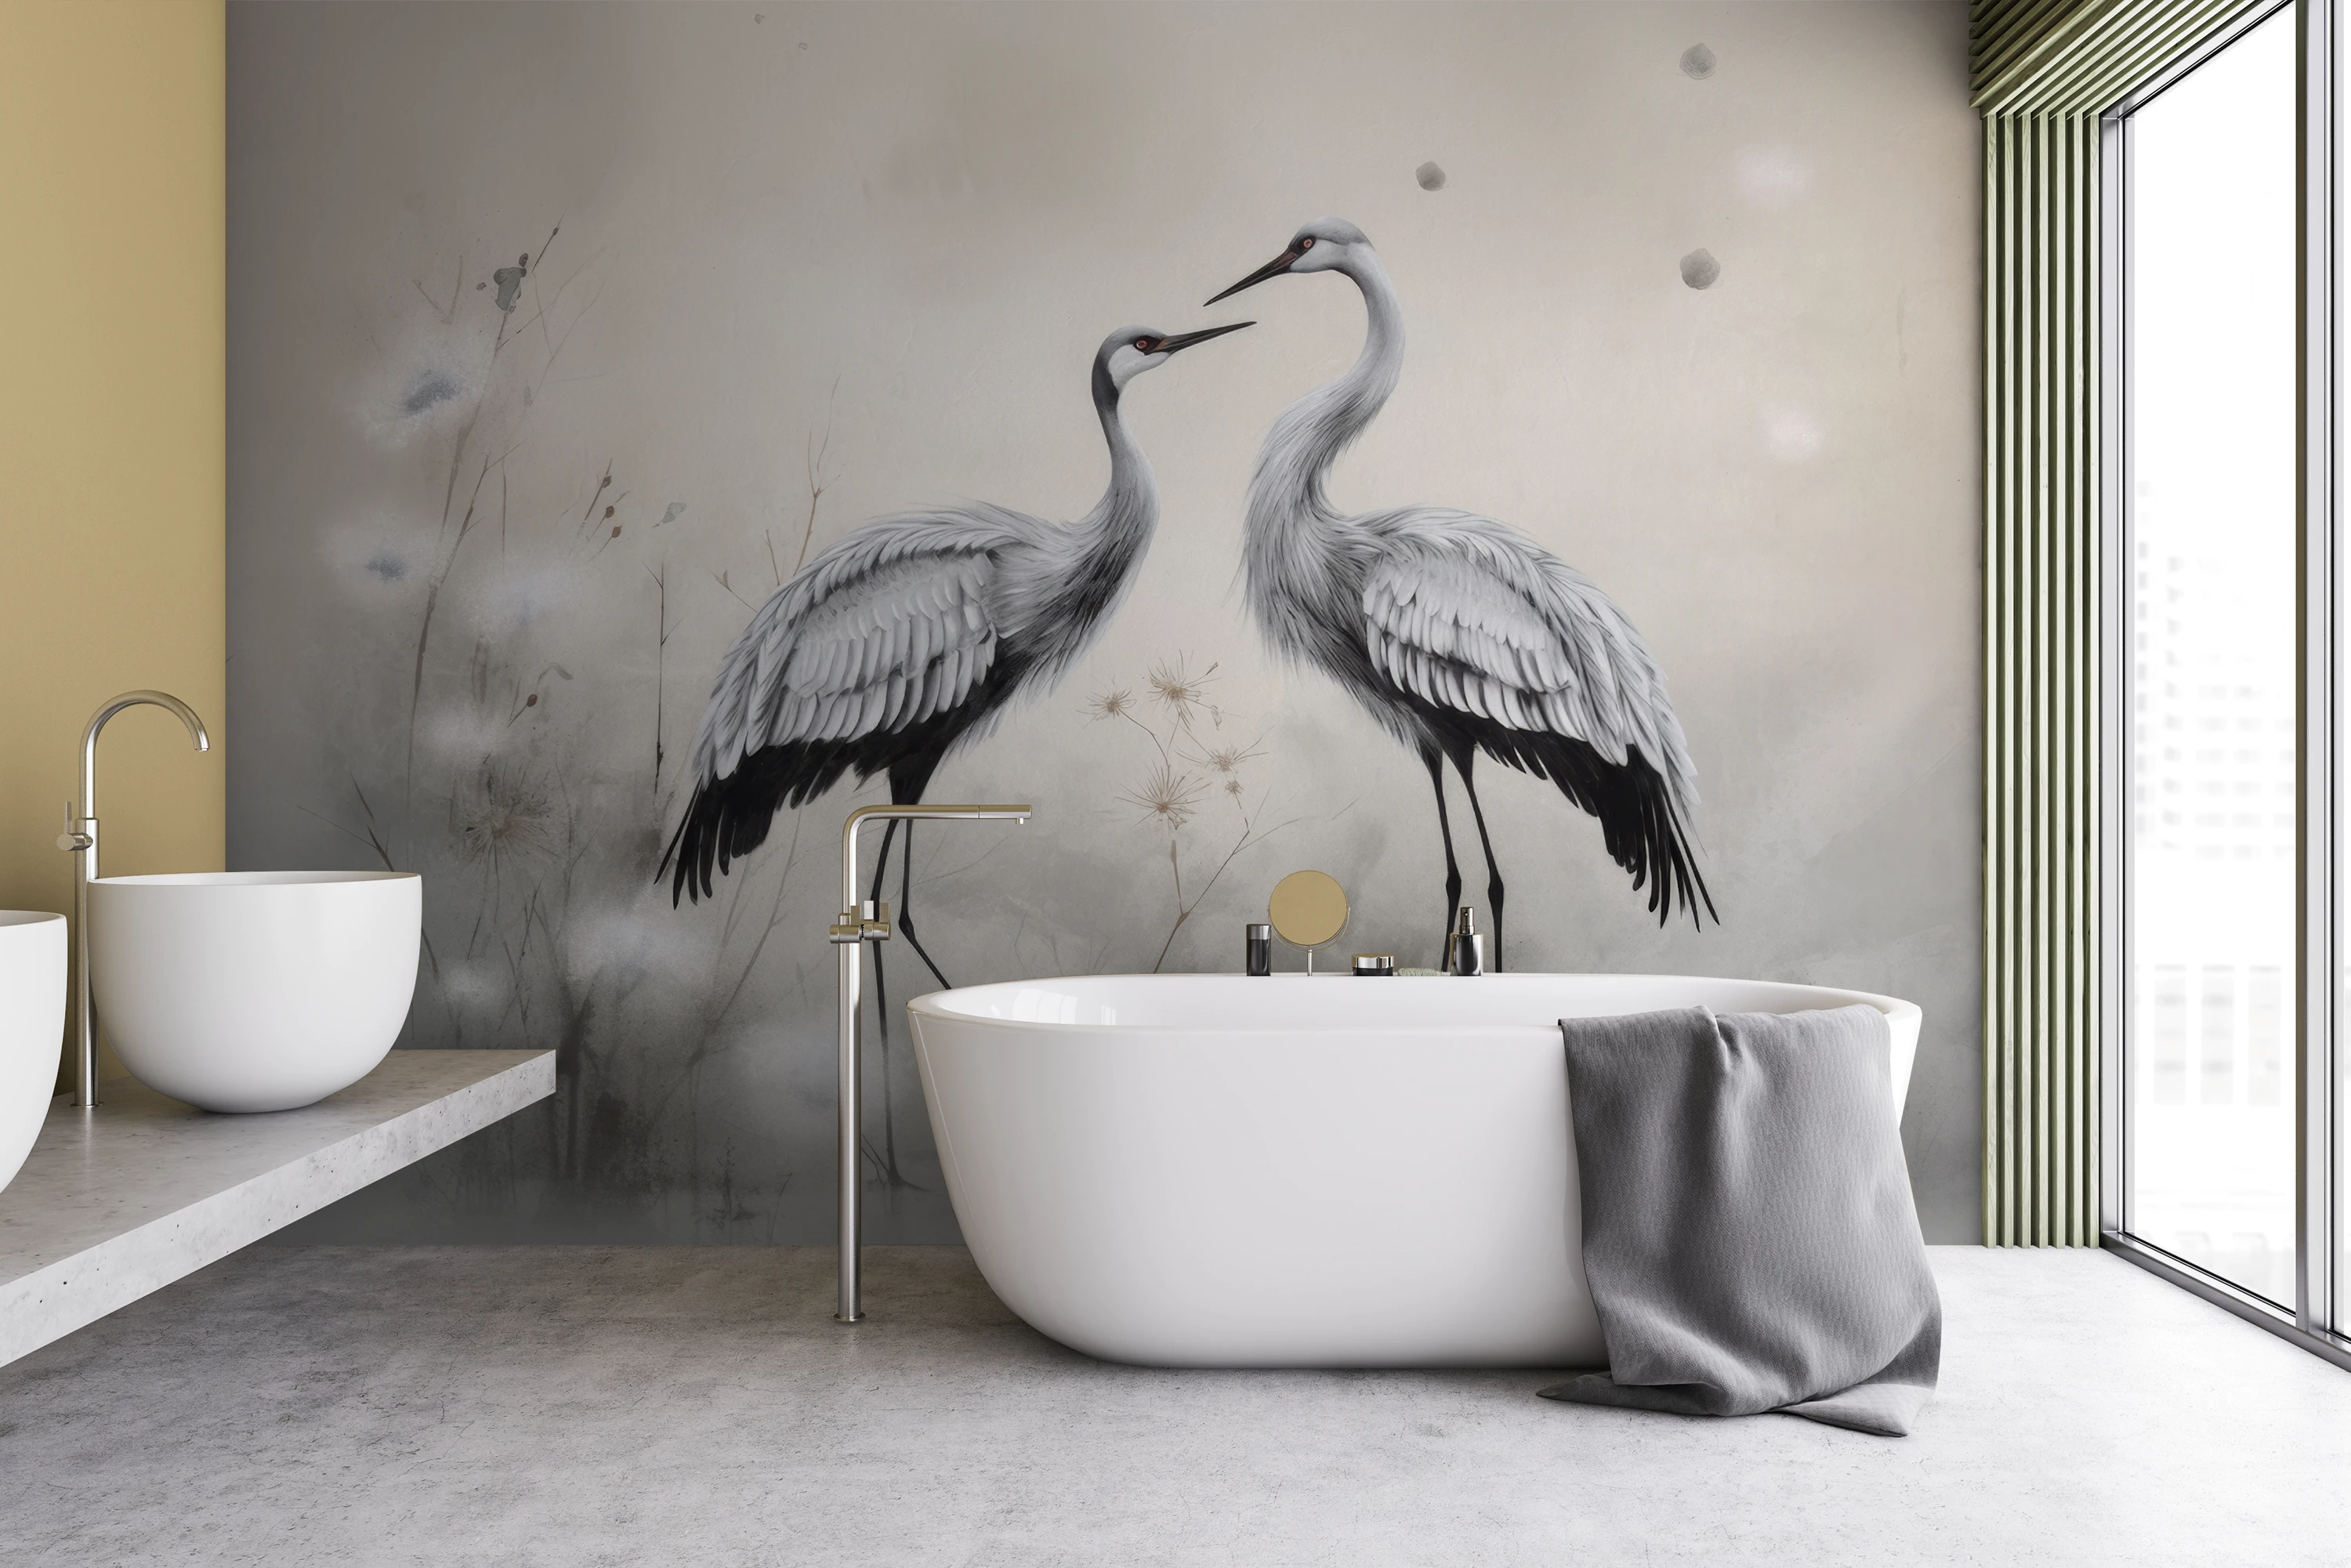 One of the Decomura photo wallpaper designs from the "Cranes" collection